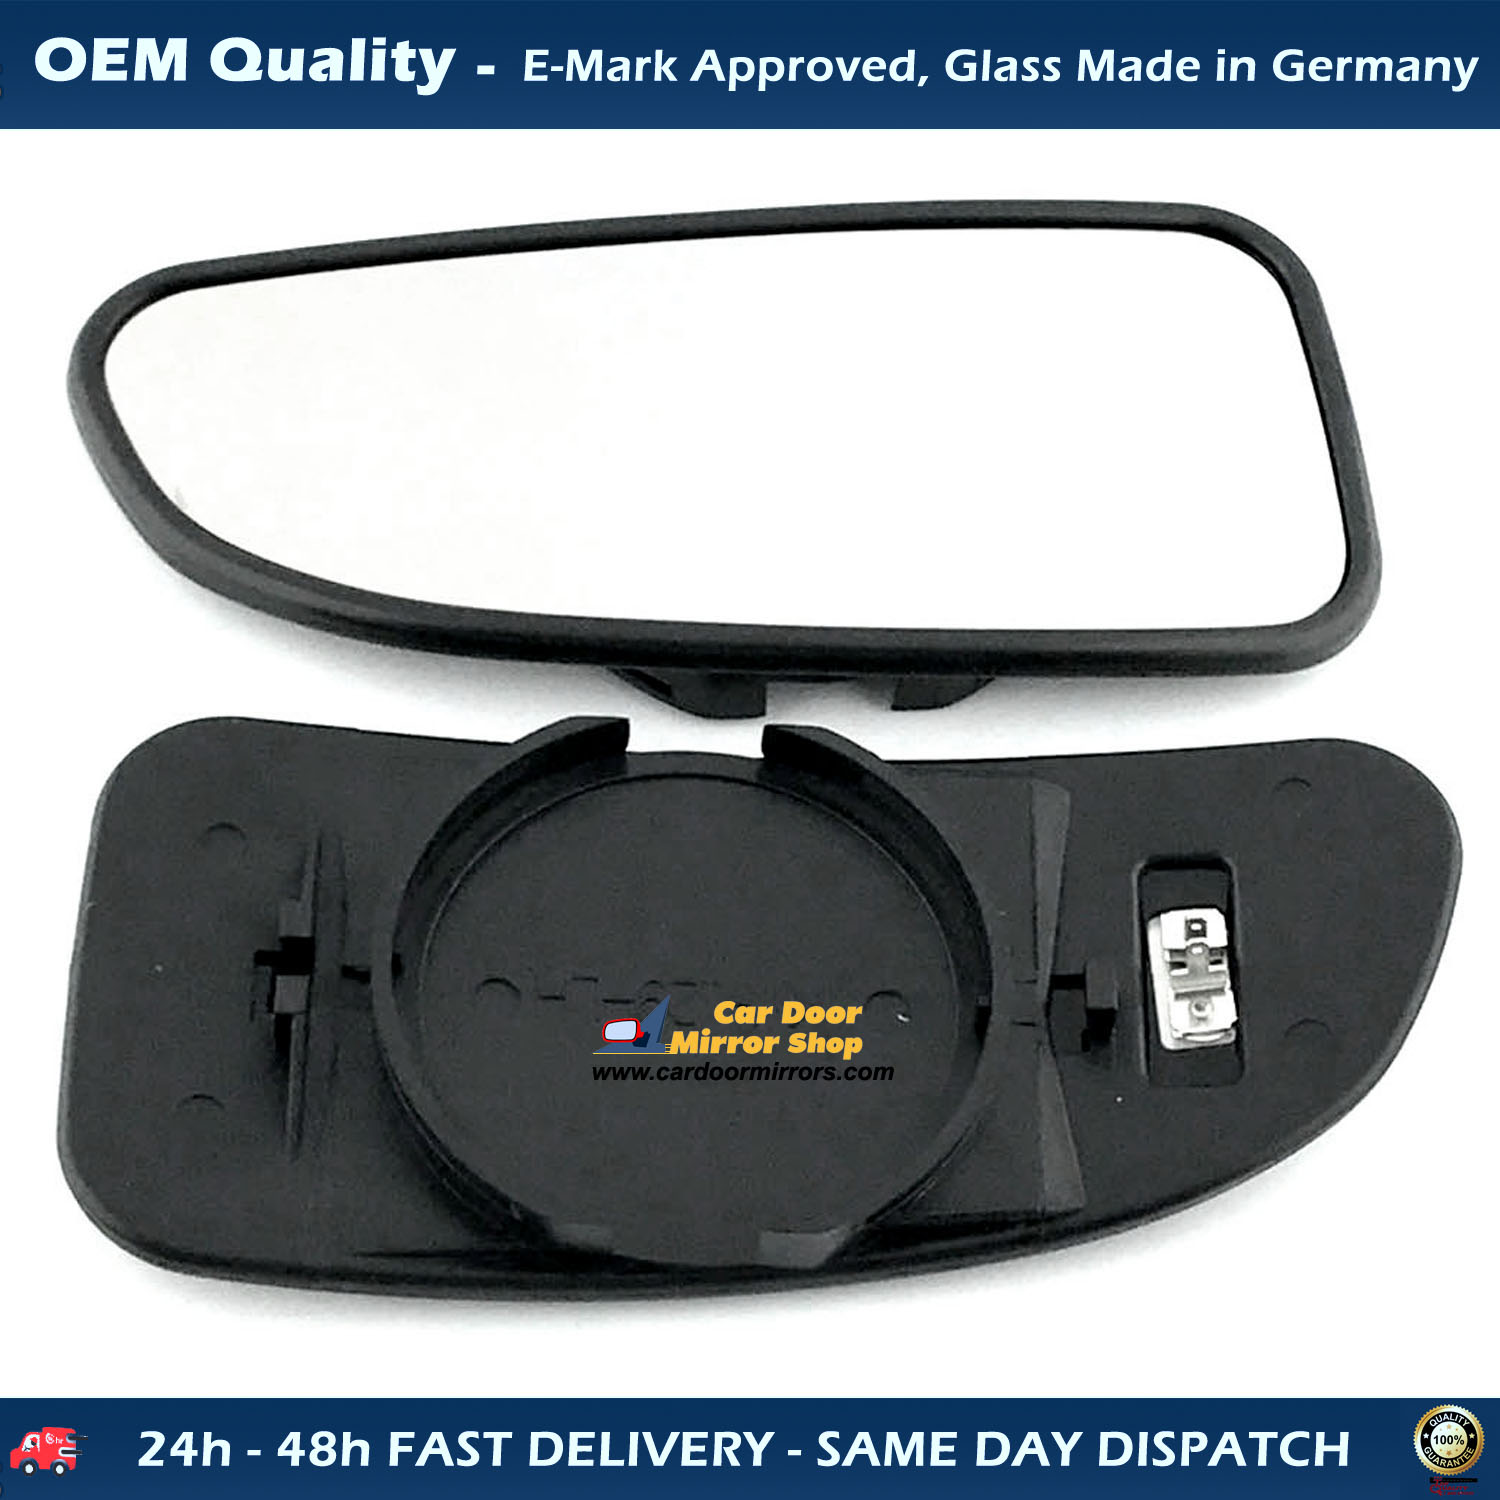 FIAT Ducato Blind Spot Wing Mirror Glass With Base LEFT HAND ( UK Passenger Side ) 2001 to 2006 – Heated Base Convex Mirror